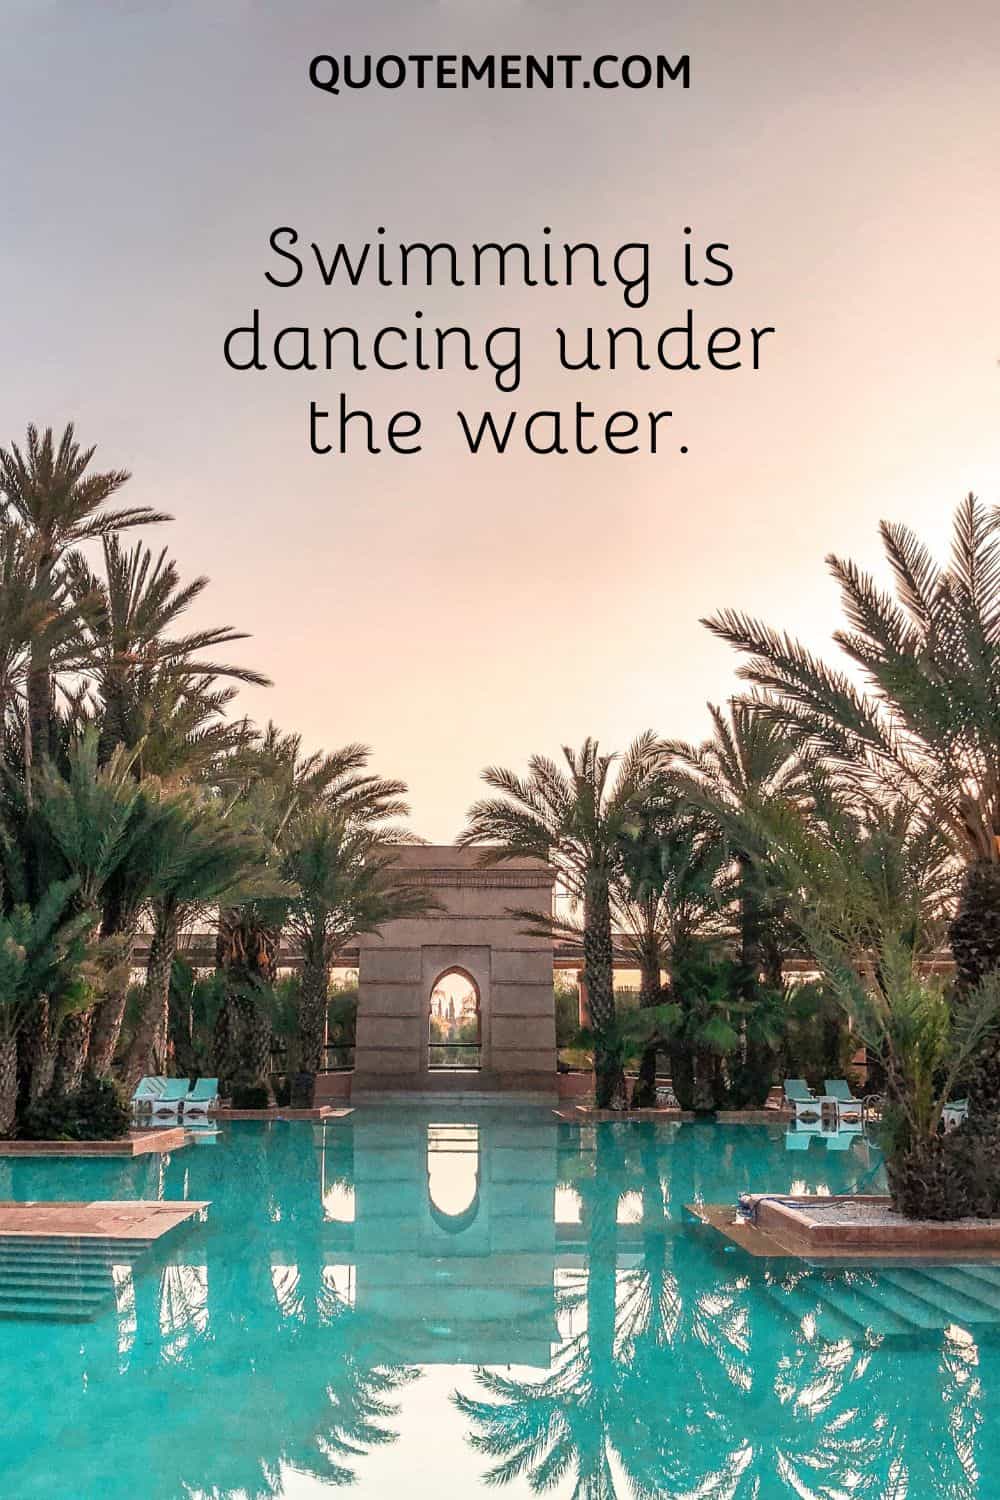 Swimming is dancing under the water.